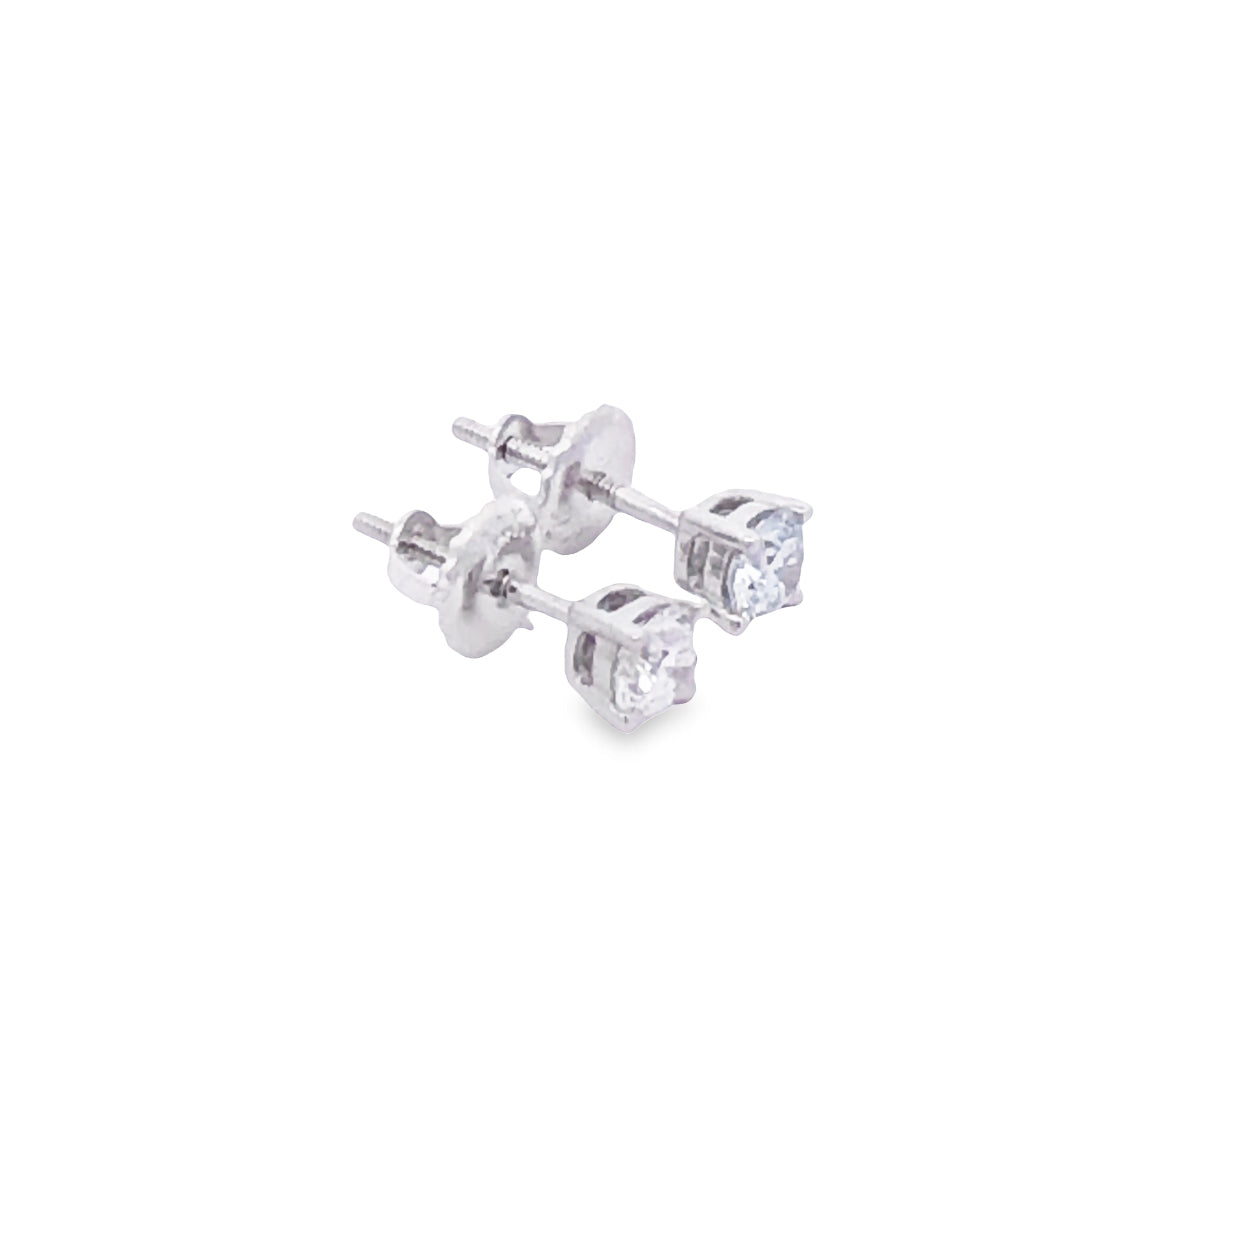 14Ct White Gold LAB GROWN Diamond Soiltaire Stud Earrings Set With A 0.25Ct E VS Has Cert. TDW=0.50CT